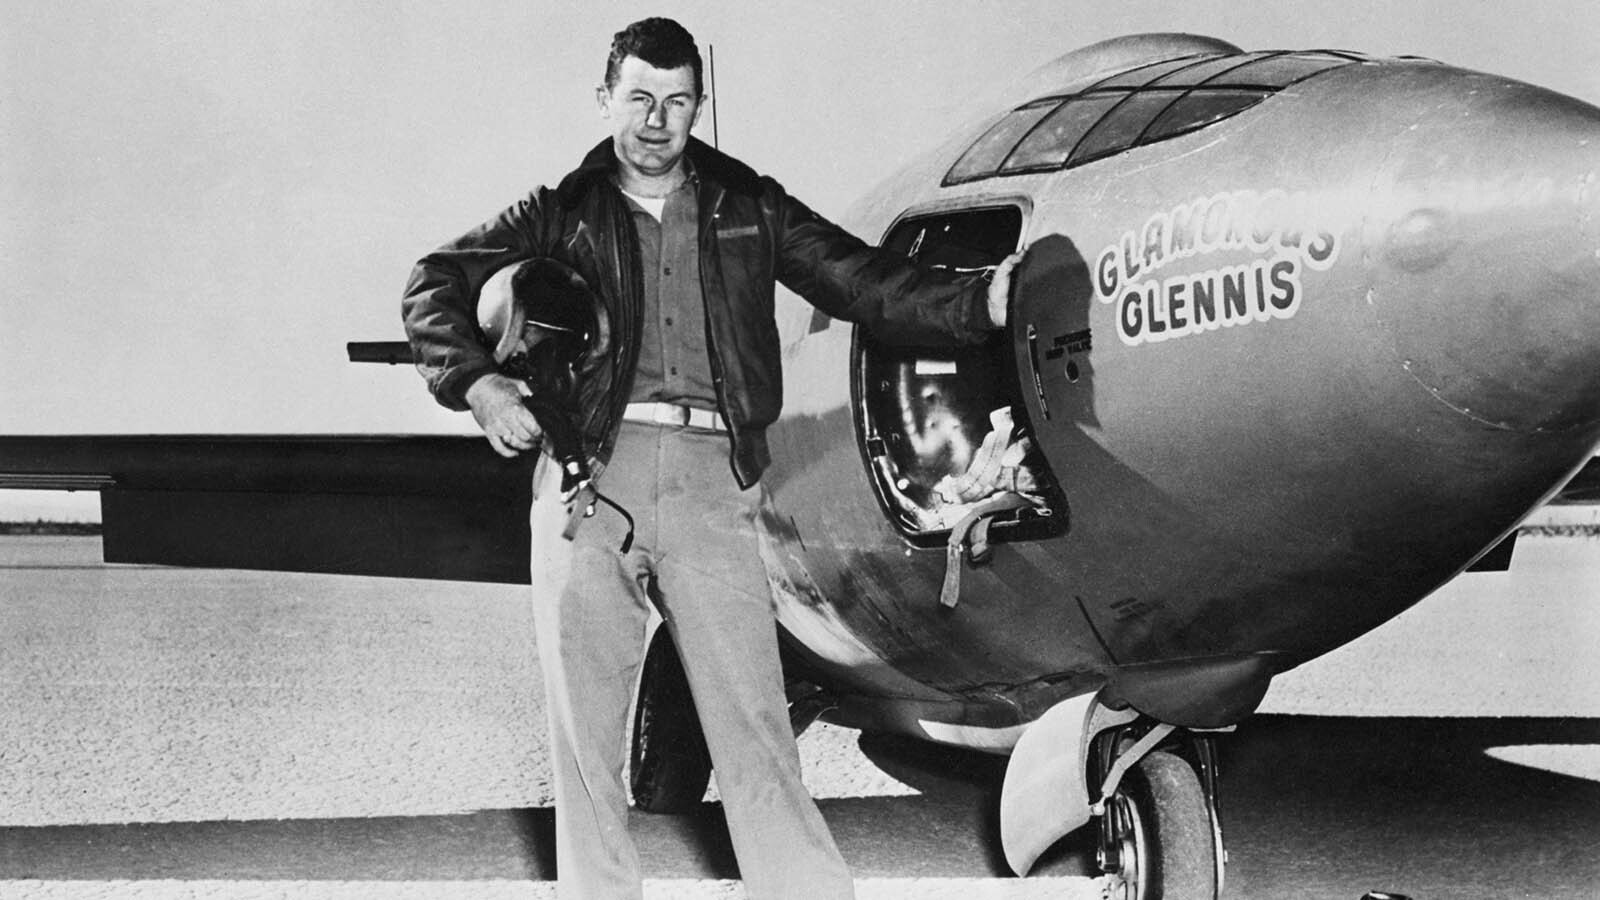 Capt. Chuck Yeager standing next to the Air Force's Bell X-1 supersonic research aircraft at Muroc Army Air Force Base, California, October 1947. Yeager named it the Glamorous Glennis after his wife. He became the first man to fly faster than the speed of sound Oct. 14, 1947.